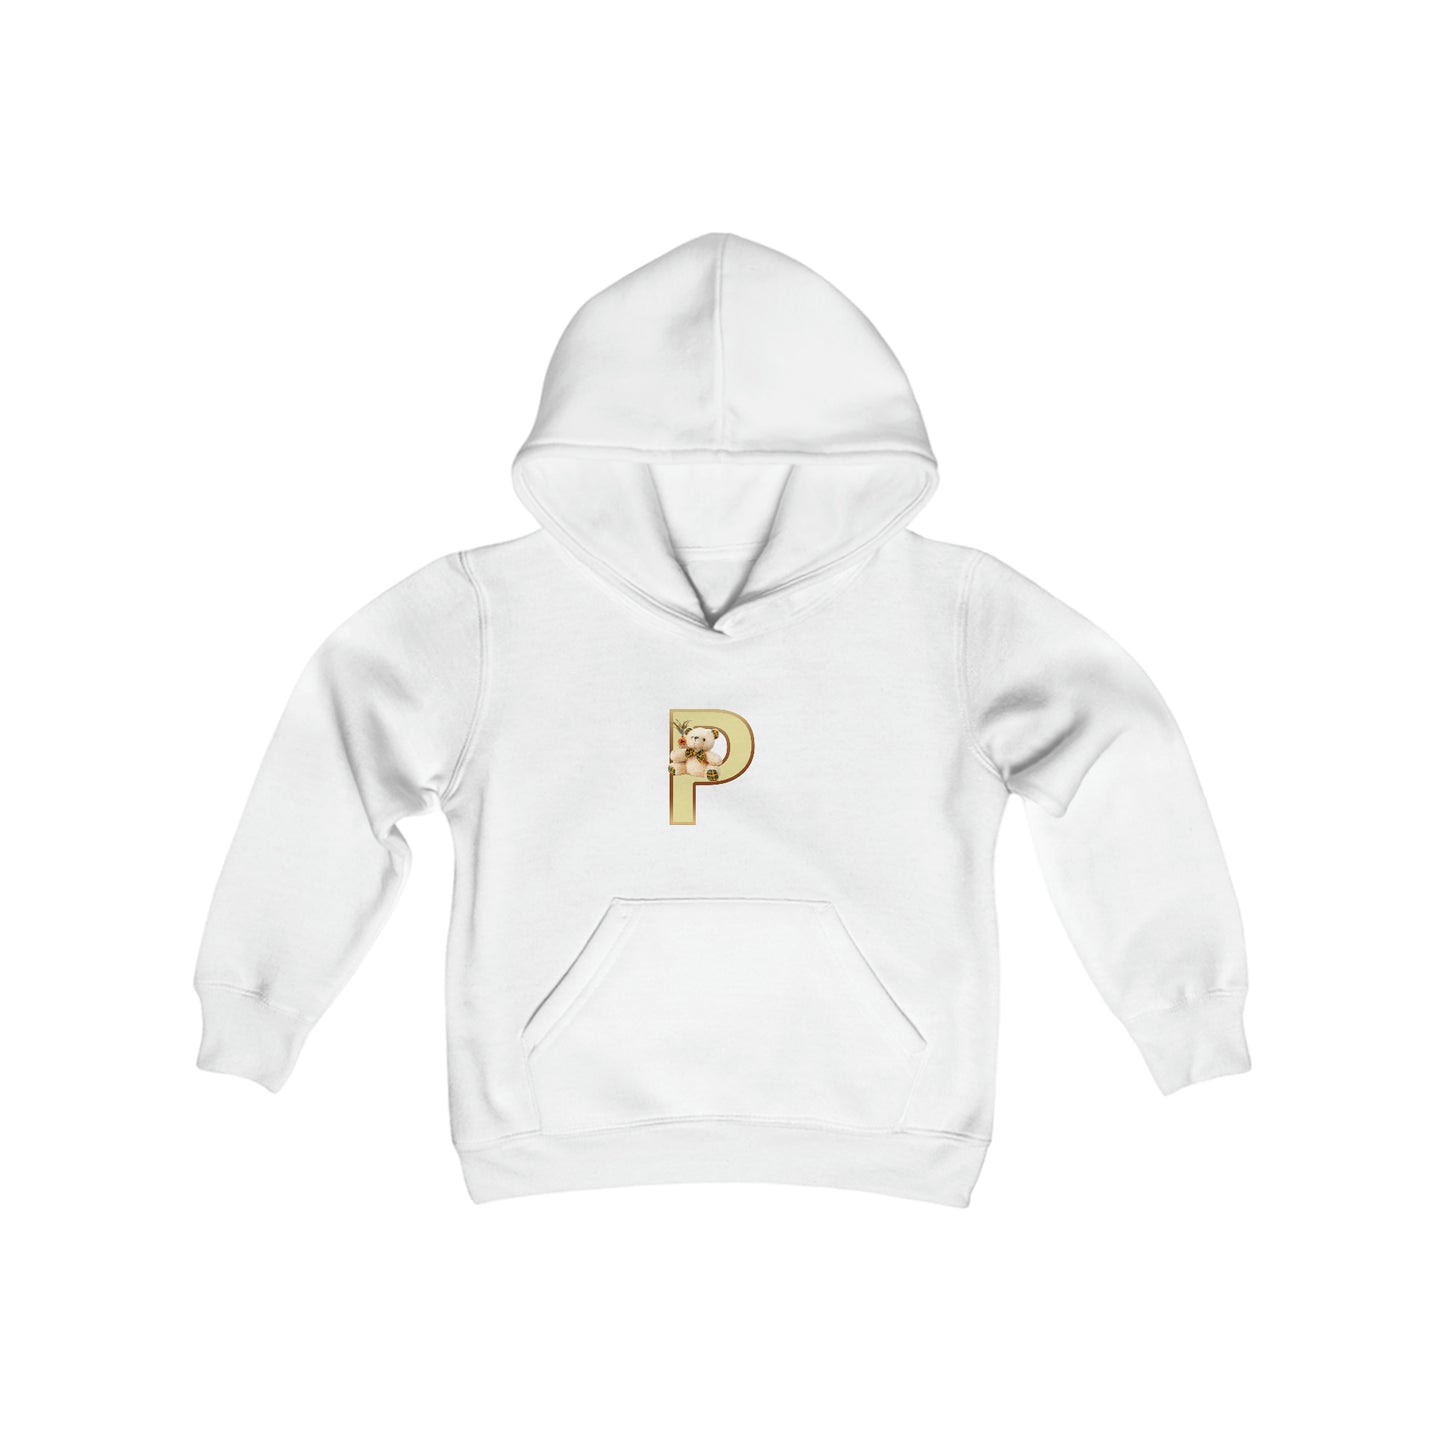 Youth Heavy Blend Hooded Sweatshirt Featuring the Letter P – Elevate Your Wardrobe with Trendsetting Apparel for the Young and Vibrant!"